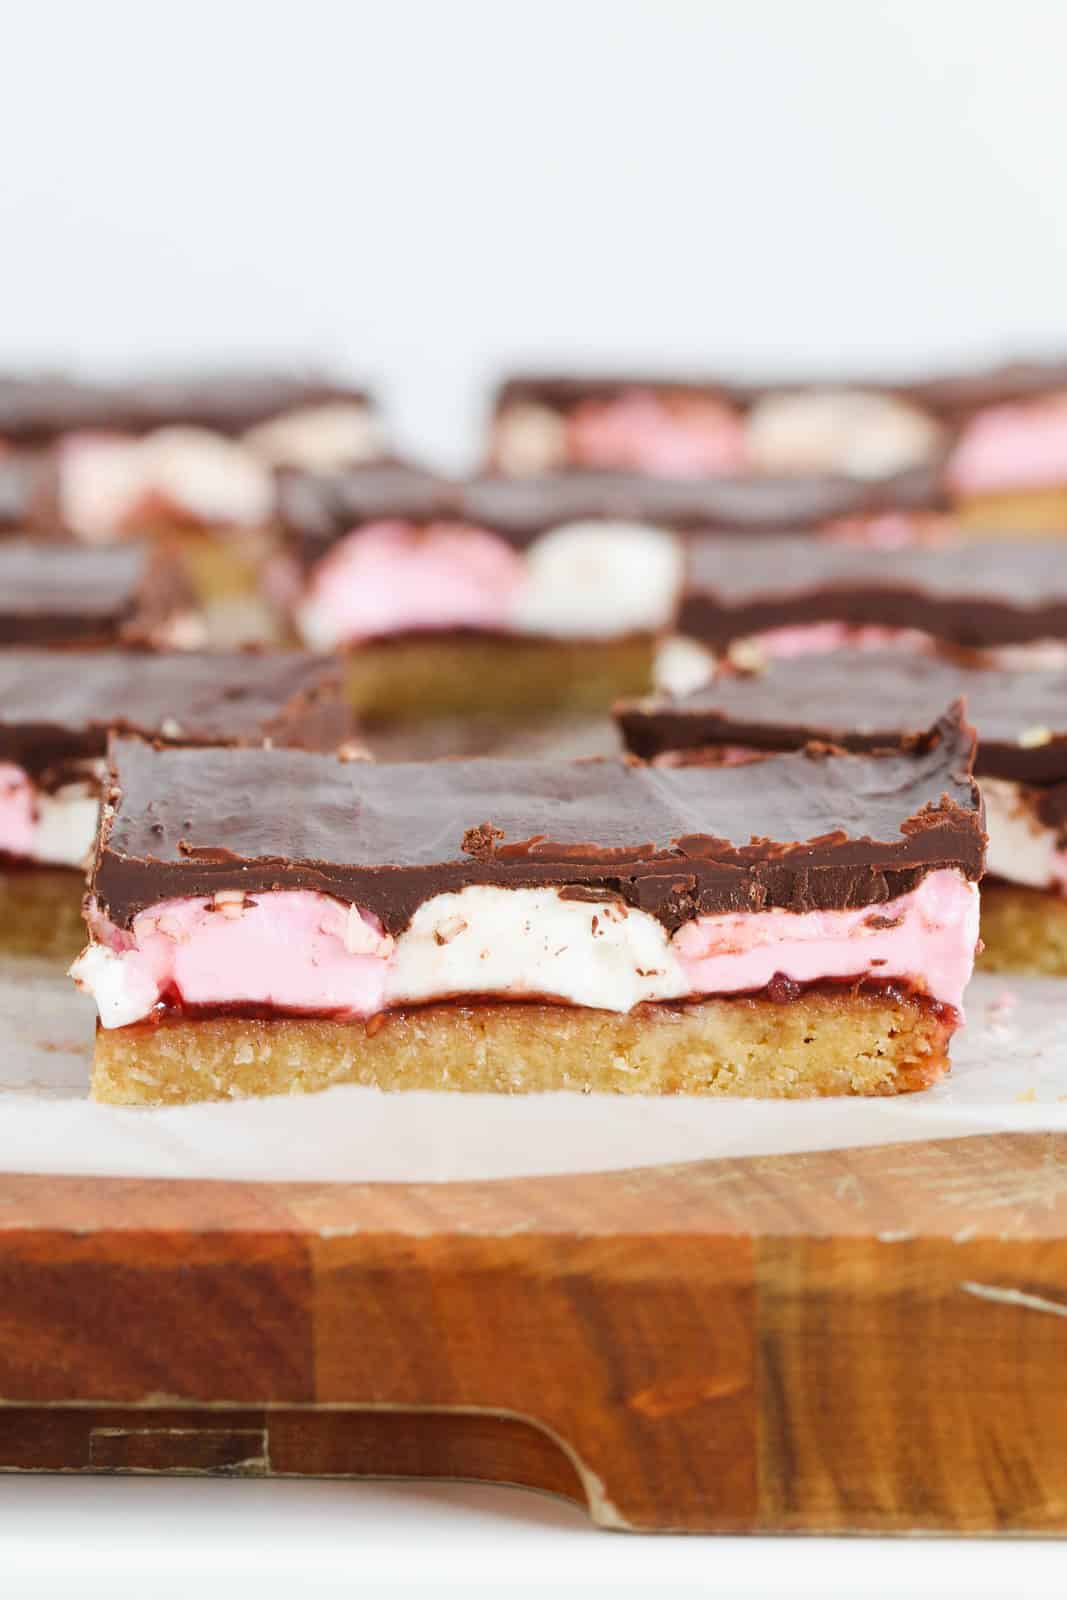 Marshmallow slice sitting on a wooden chopping board